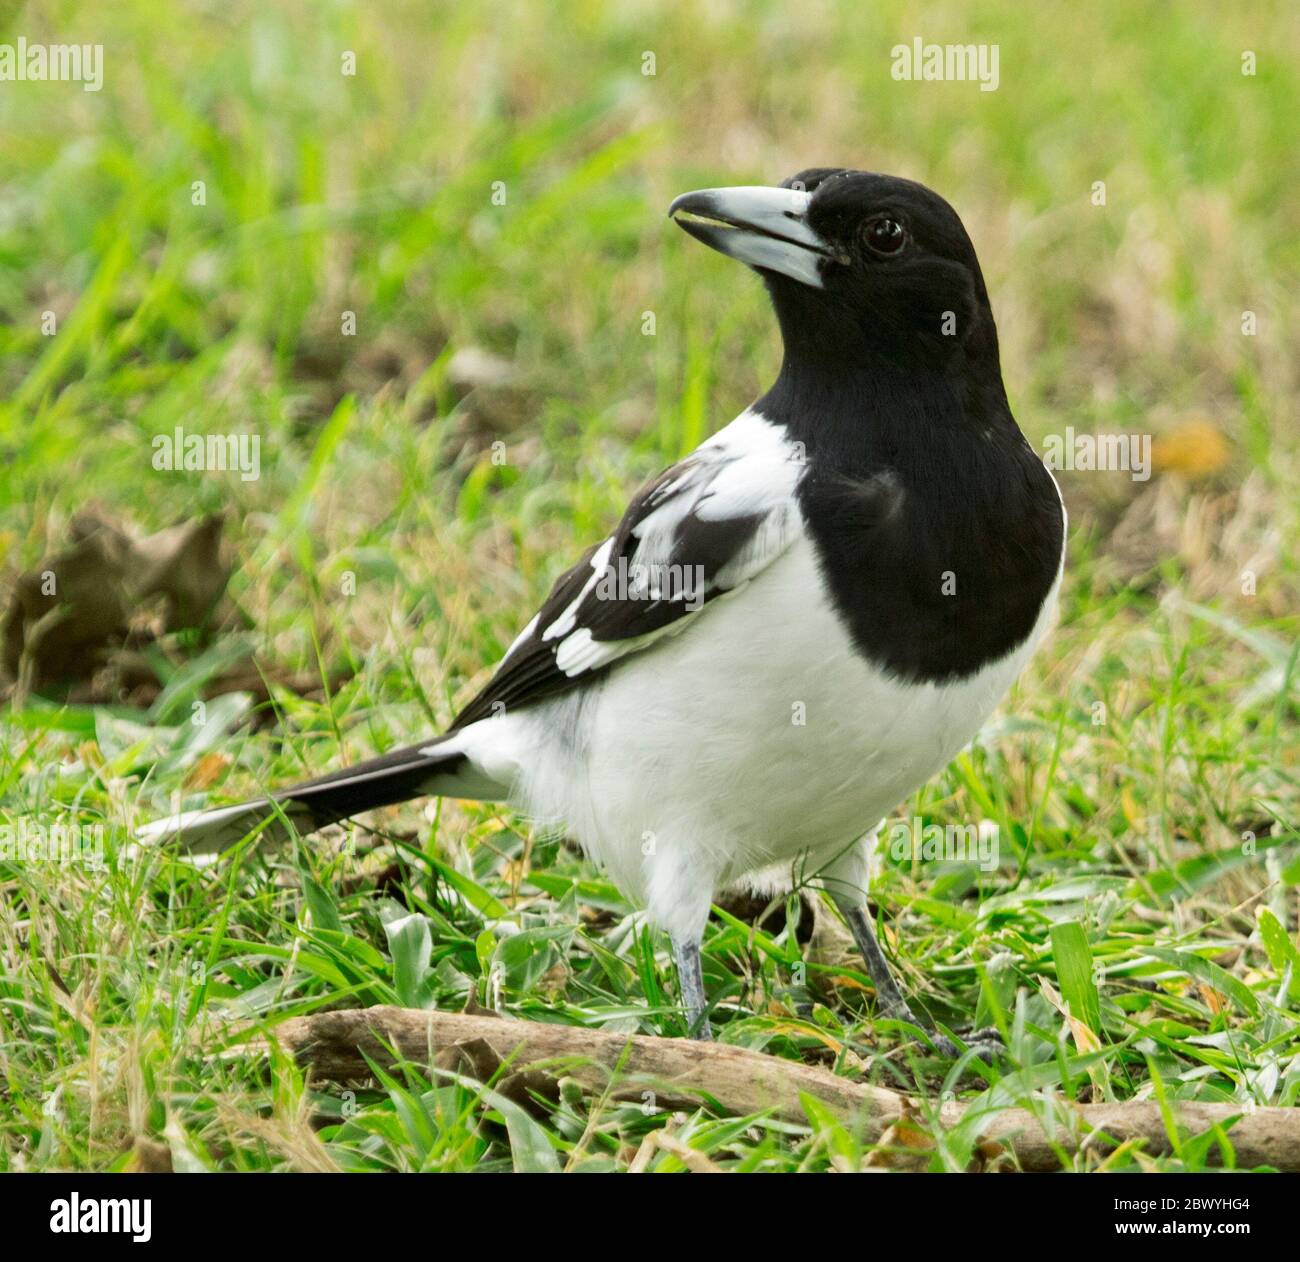 Black and white Pied butcherbird, Cracticus nigrogularis, with bill open and glint in its eye, on lawn in urban area in Australia Stock Photo